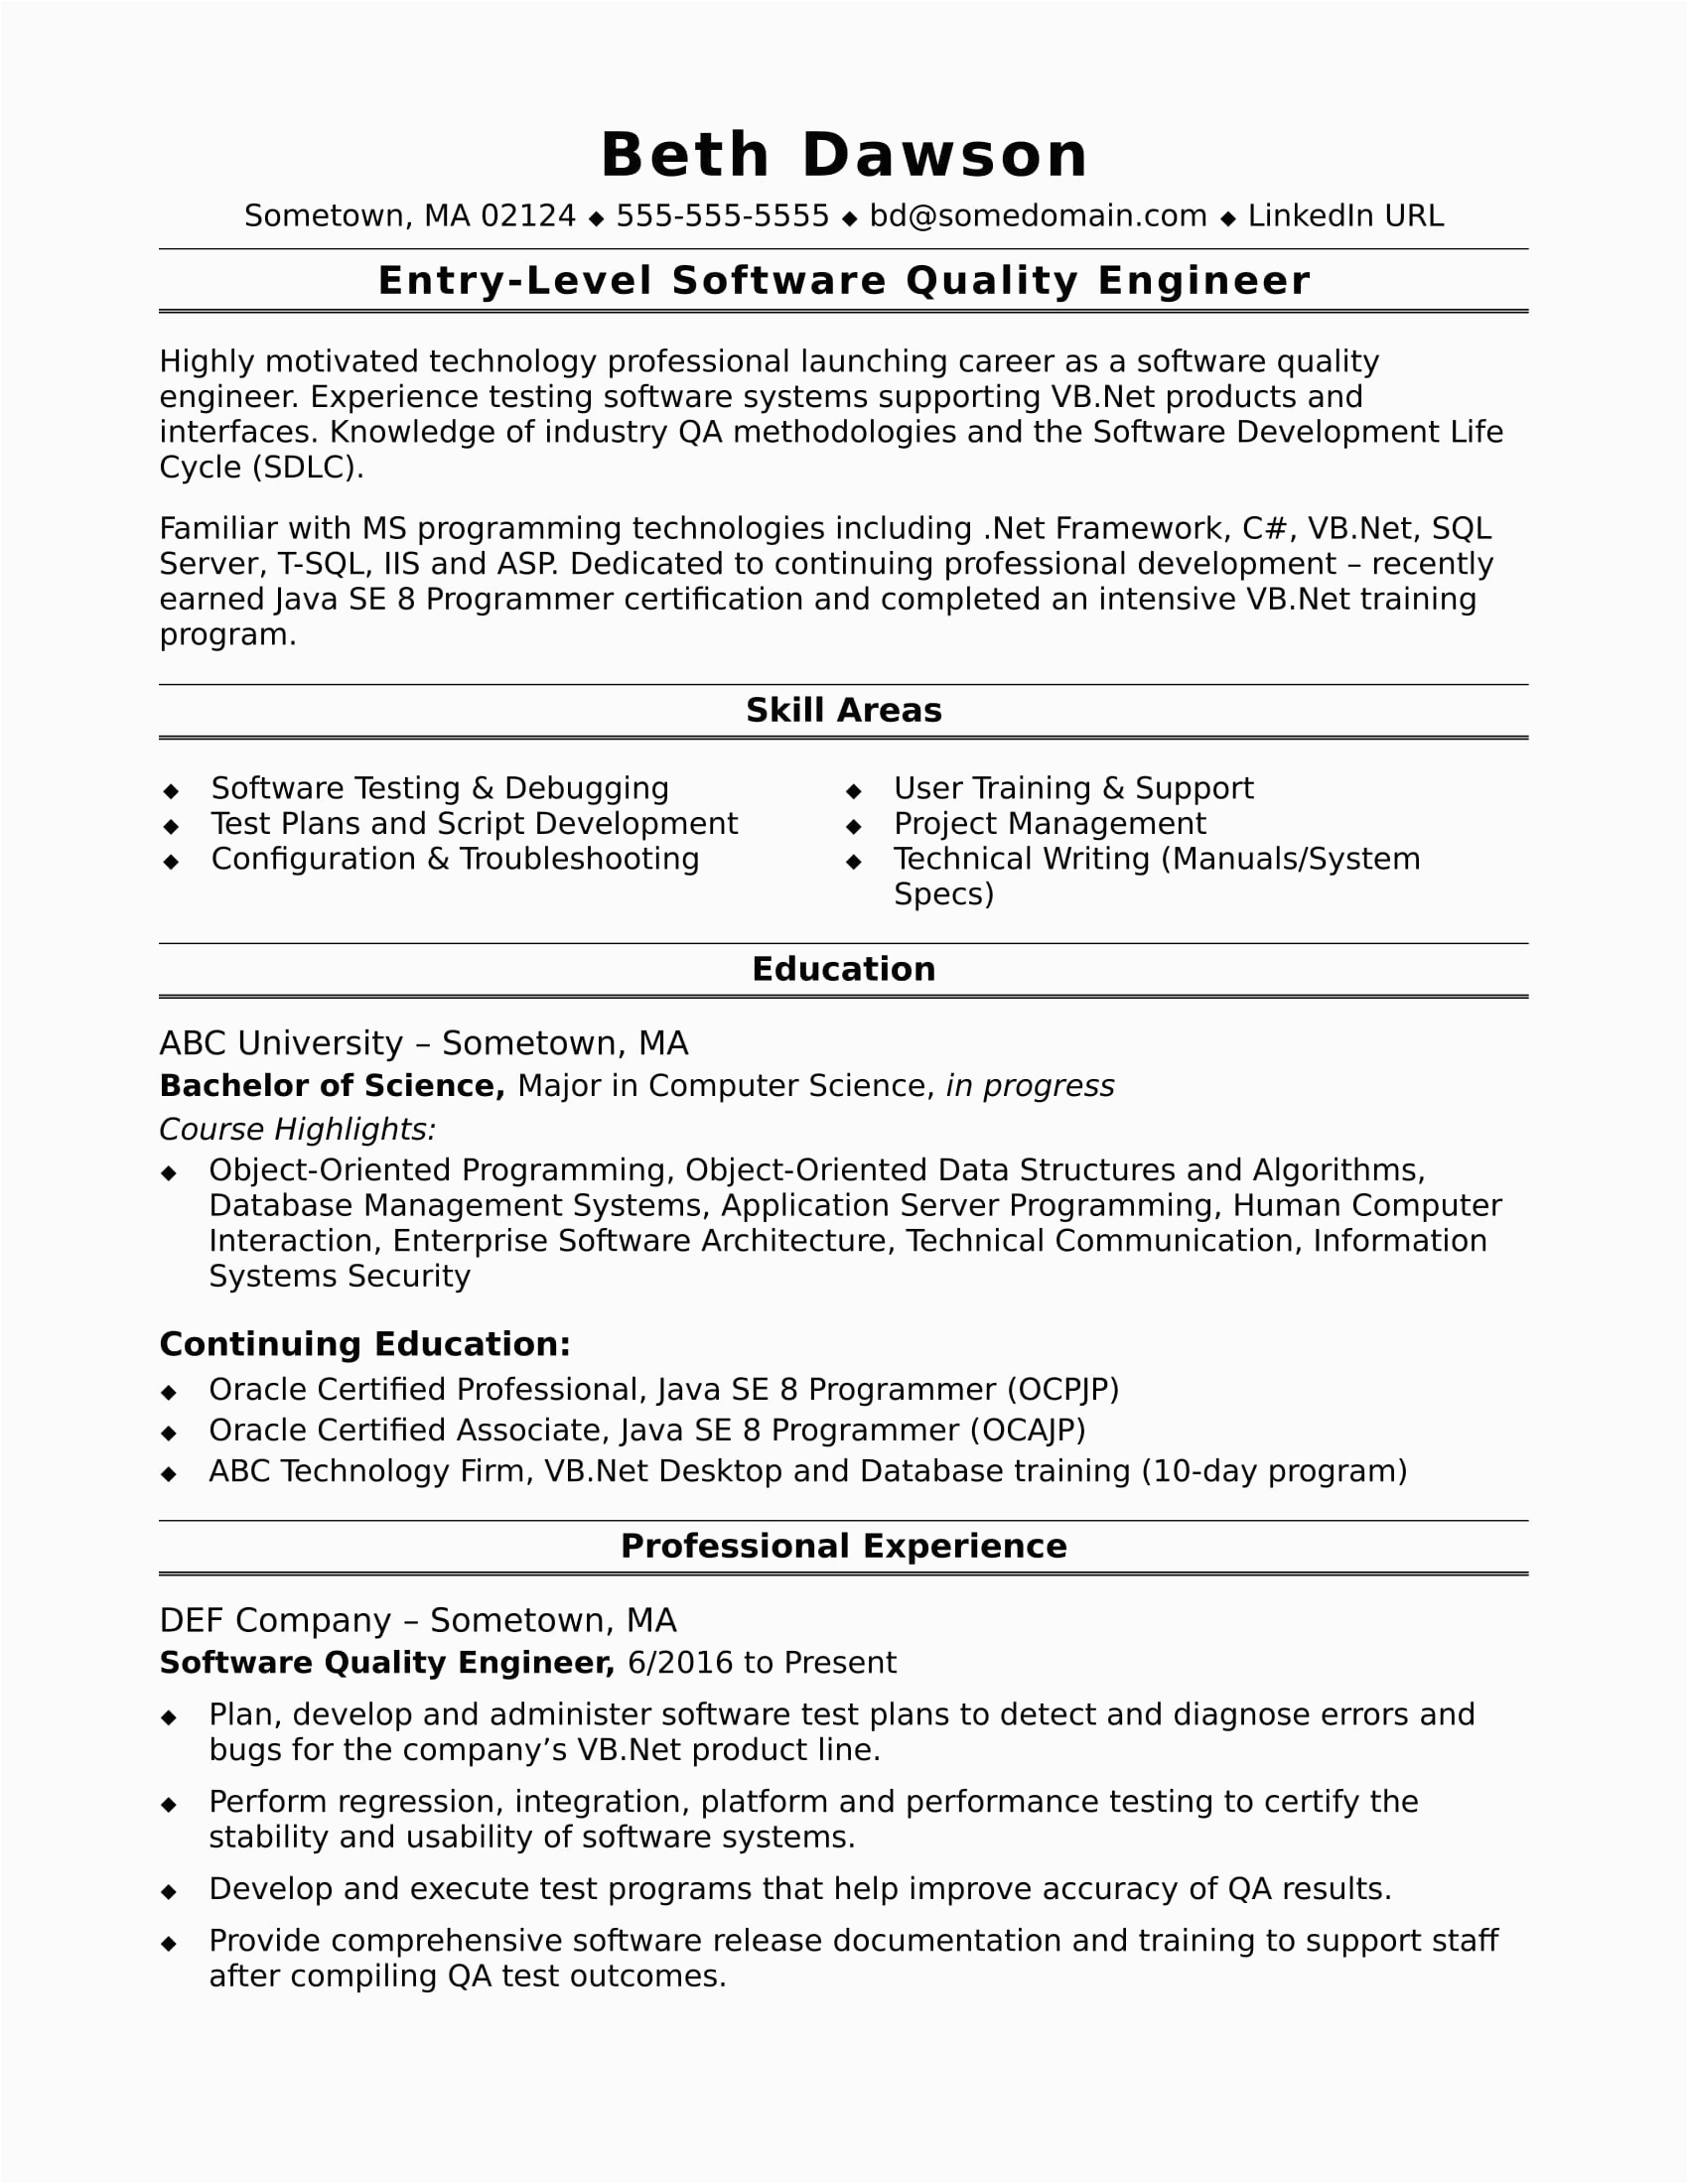 Sample Of Entry Level Engineering Resume Sample Resume for An Entry Level Quality Engineer